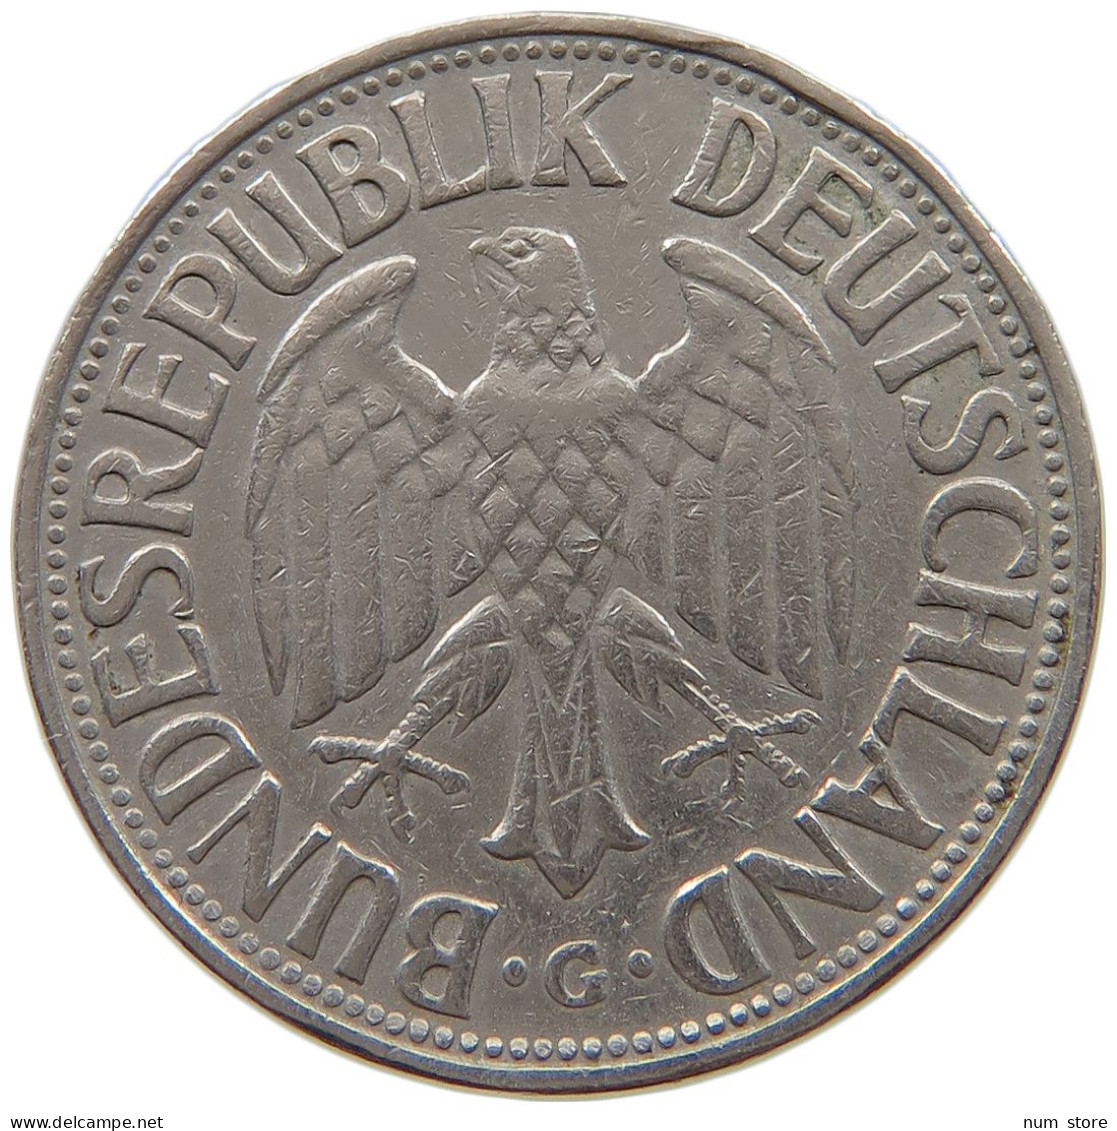 GERMANY WEST 1 MARK 1957 G #a061 0299 - 1 Marco